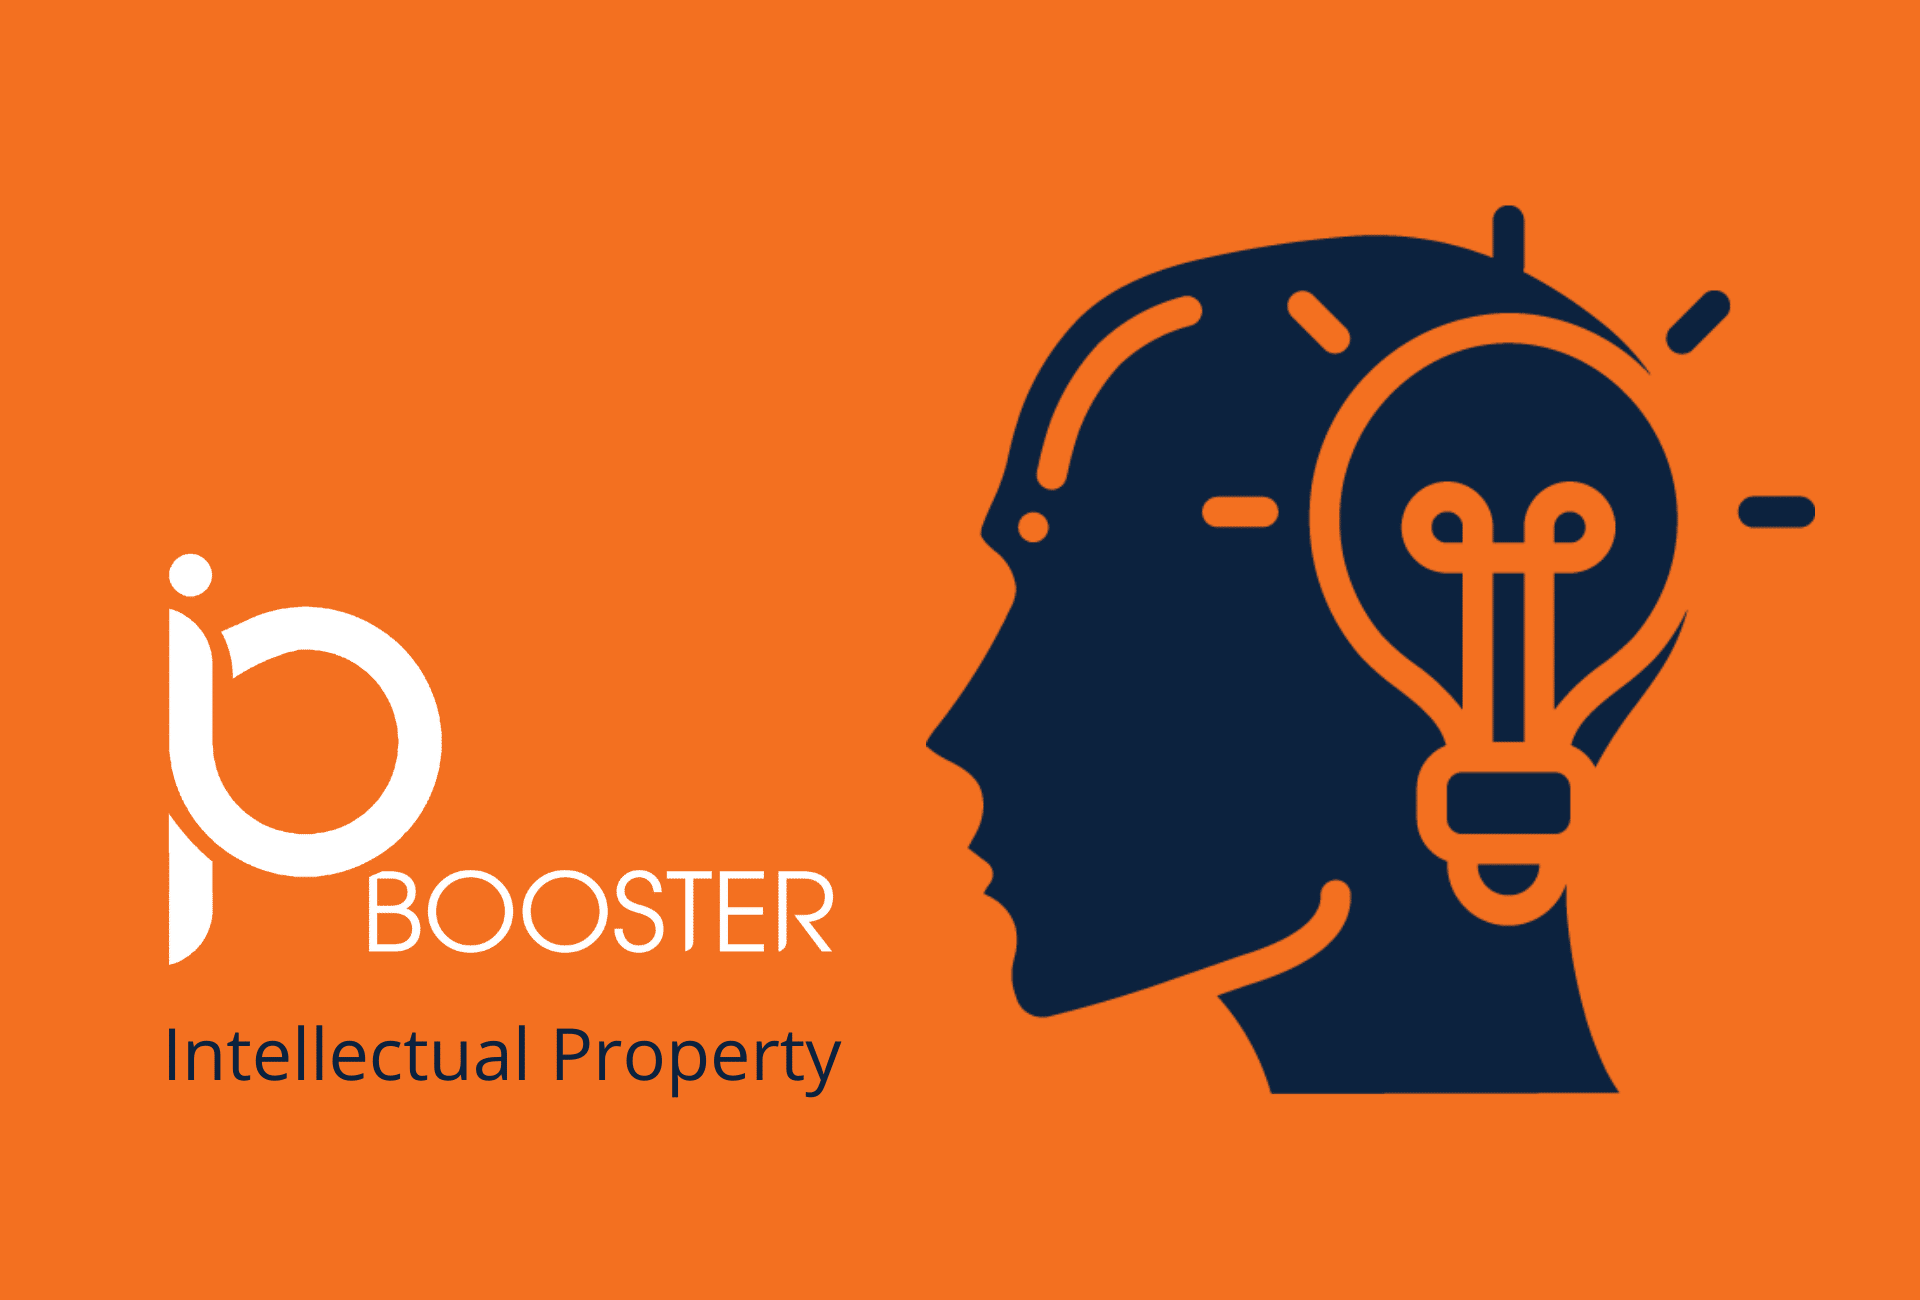 IP Booster call on intellectual property asessment is now open!